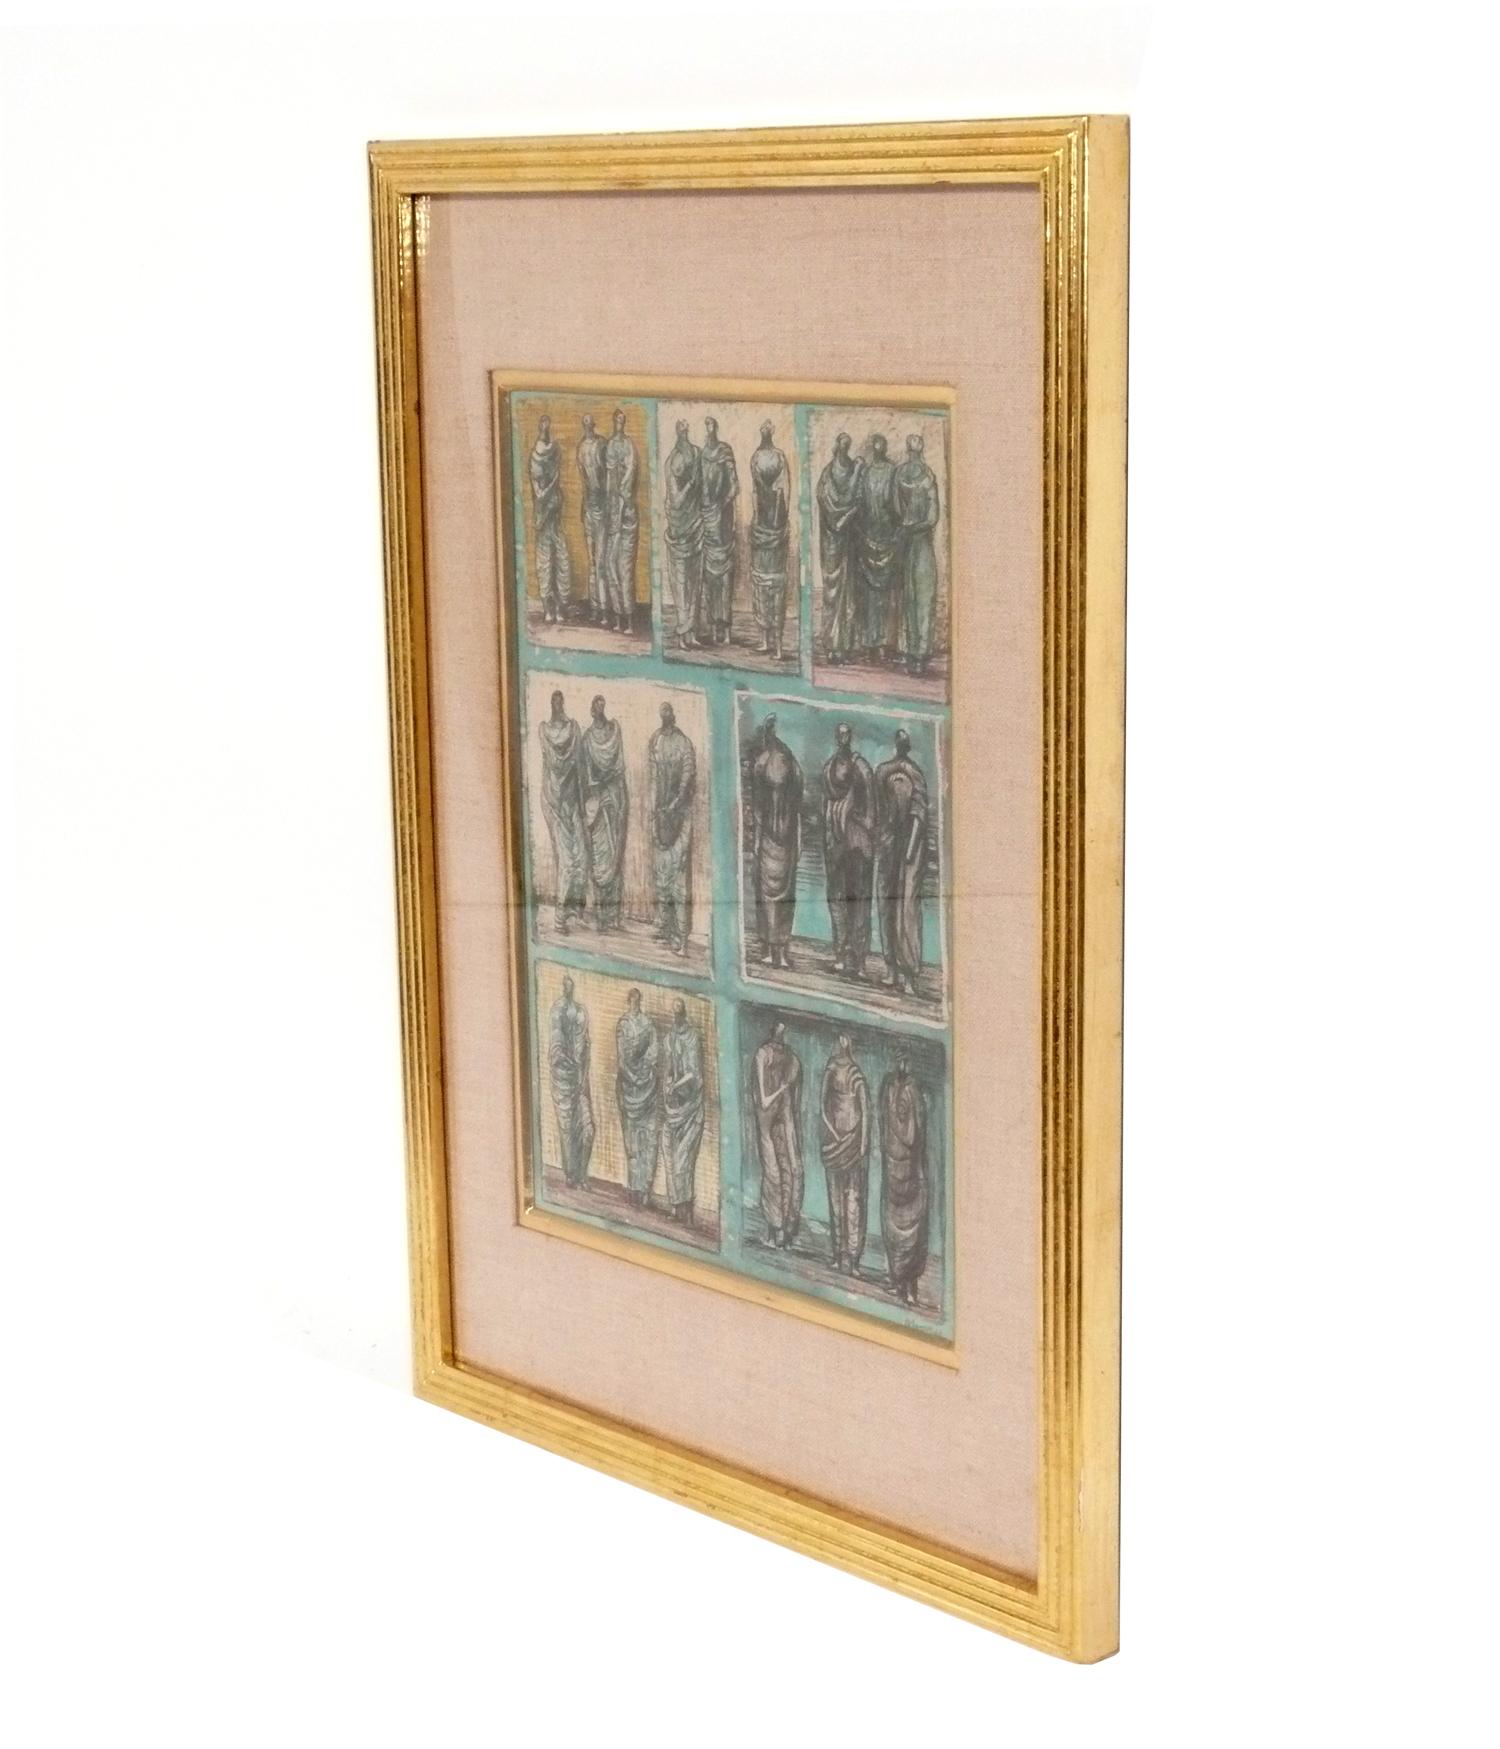 Henry Moore lithograph, entitled Studies of Three Standing Figures, English, circa 1960s. Beautifully framed in a 22 karat gold reeded frame with silk mat and 22 karat gilt fillet.